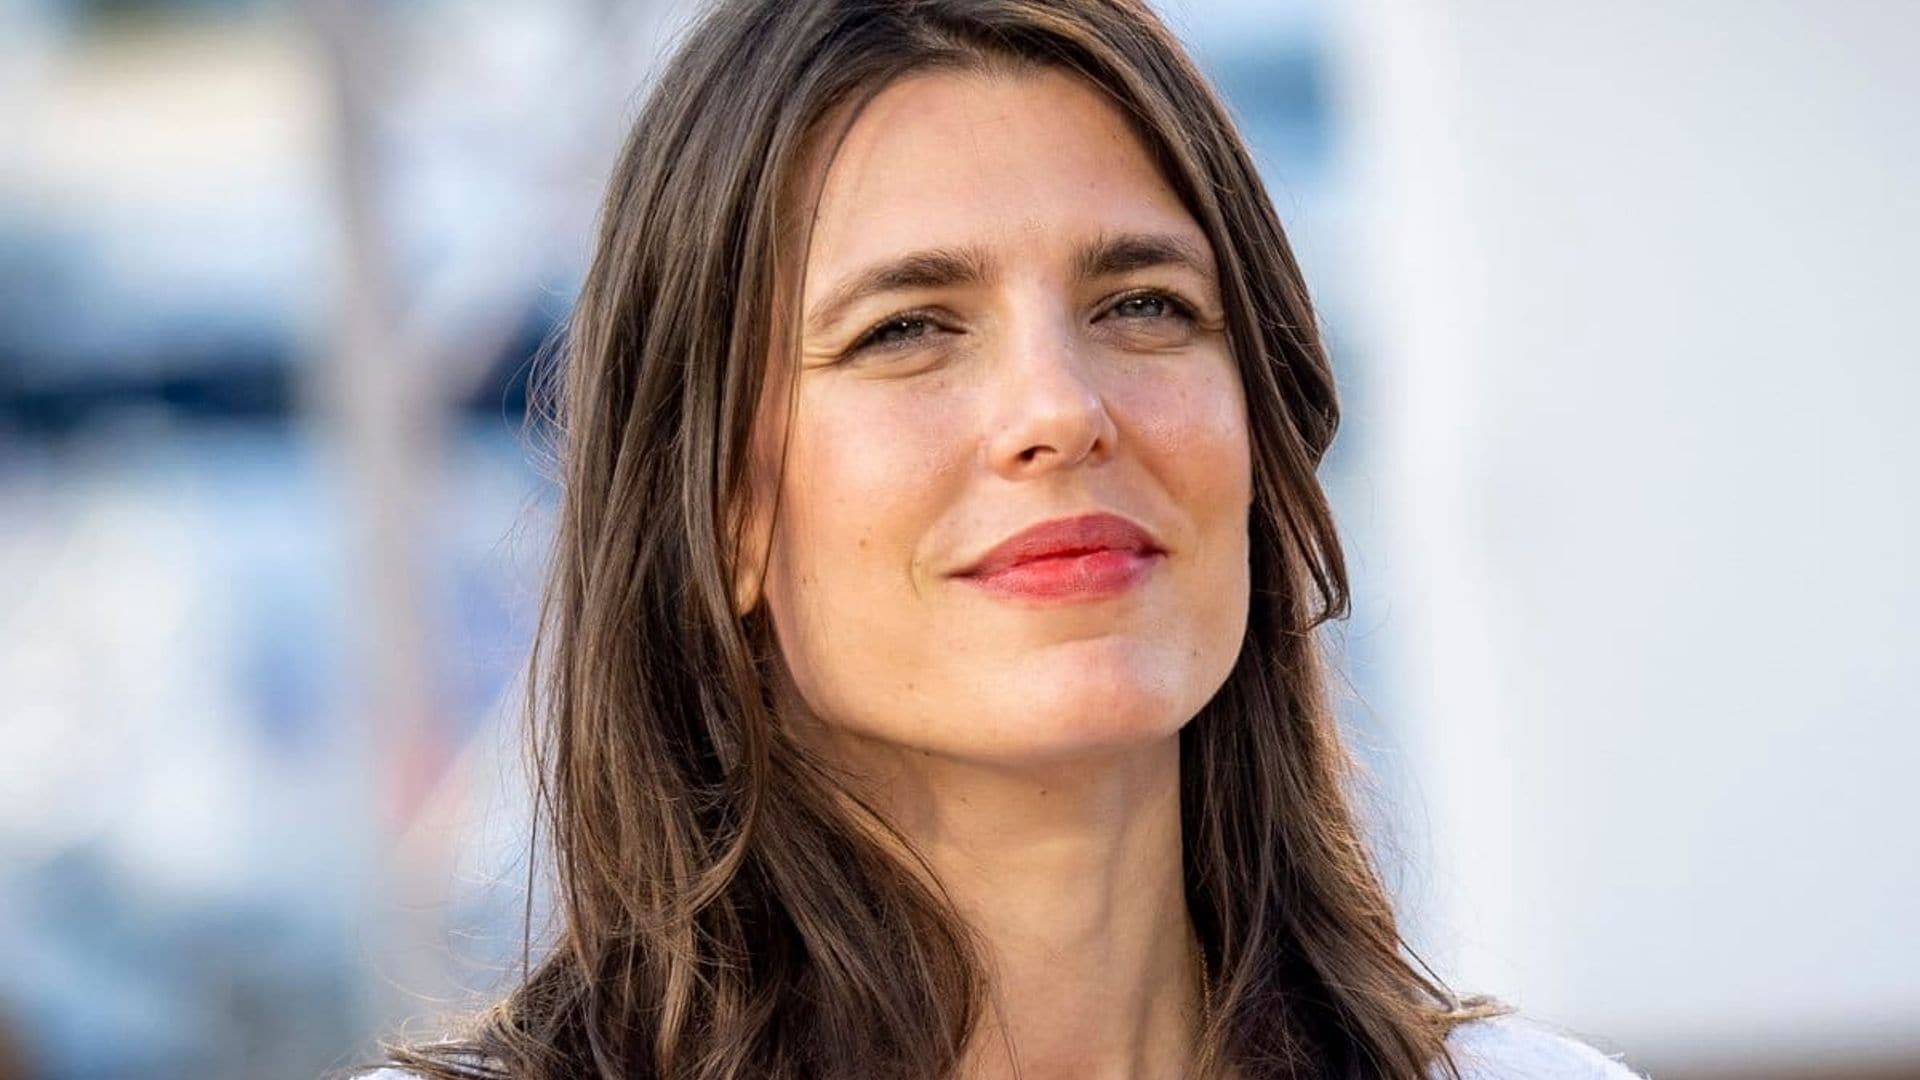 Charlotte Casiraghi’s mother-in-law and sister Princess Alexandra hit fashion show in Paris